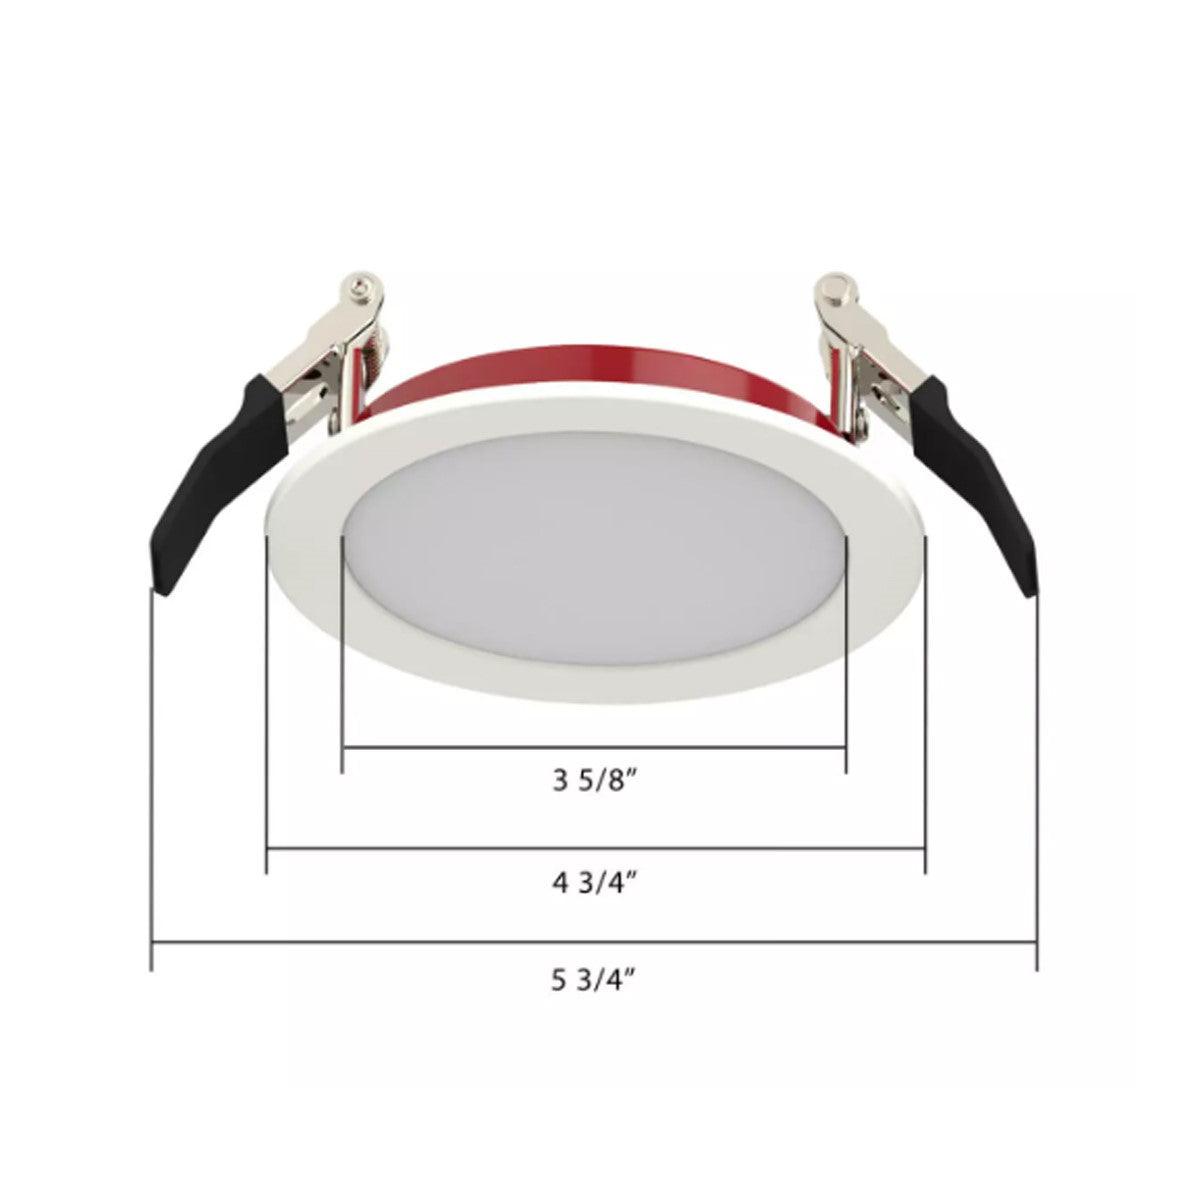 4 In. Edge-Lit Fire Resistant Wafer Canless LED Downlight, 11 Watt, 1000 Lumens, Selectable CCT, 2700K to 5000K, Smooth Trim